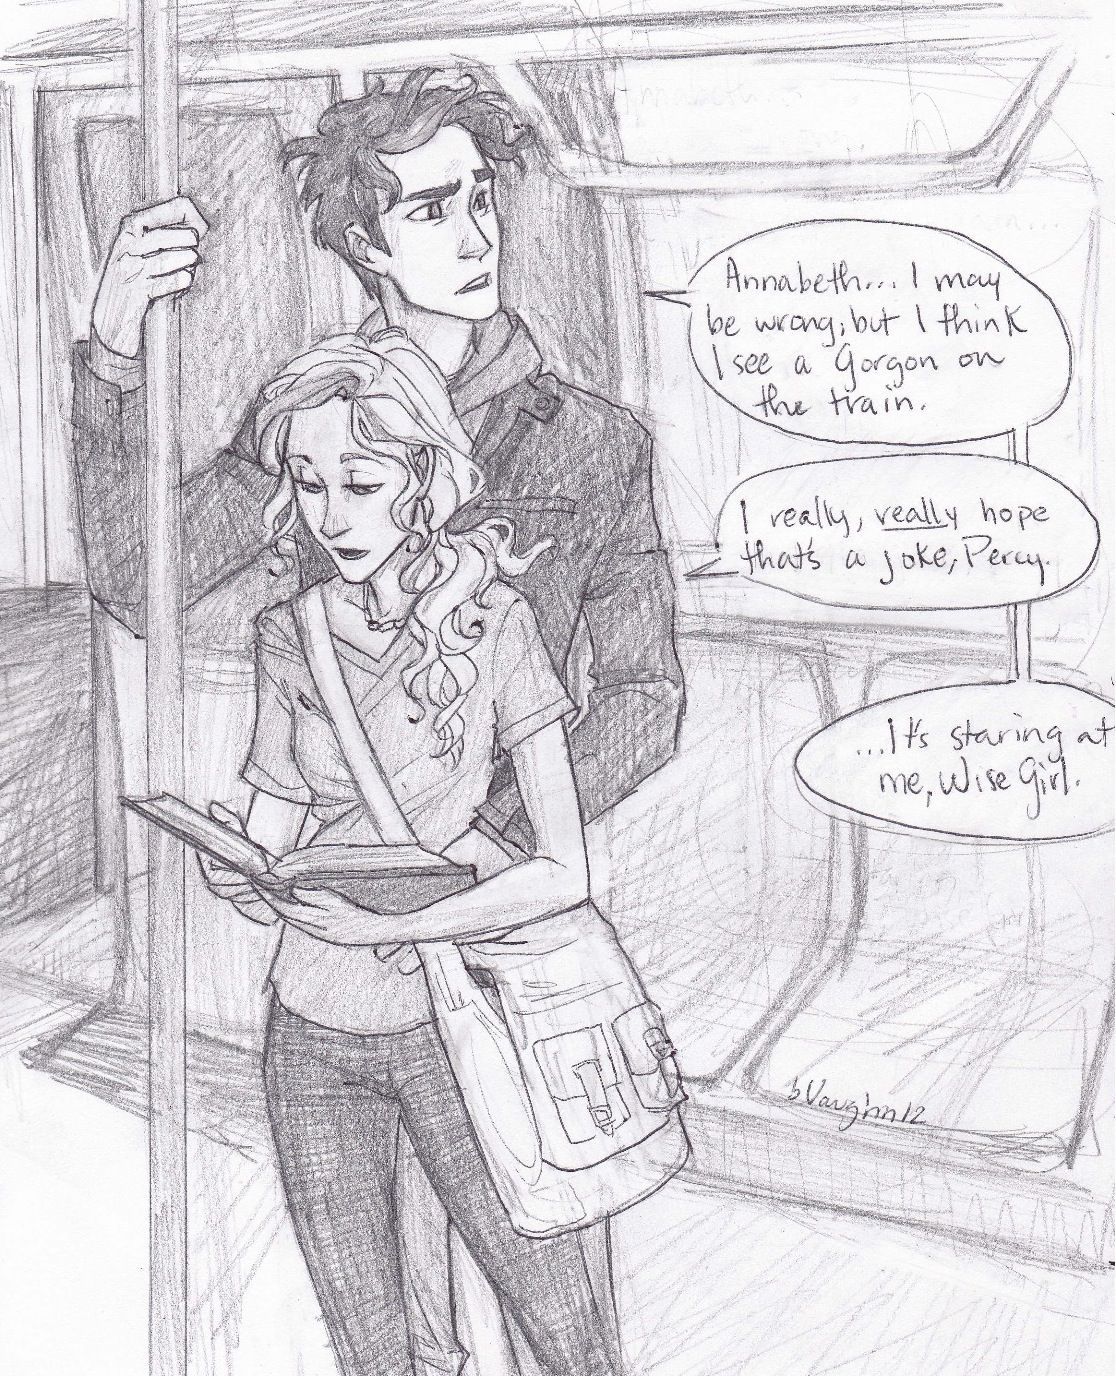 ok this is exactly what percy and annabeth look like in the book!! THANK YOU BURDGE!!!